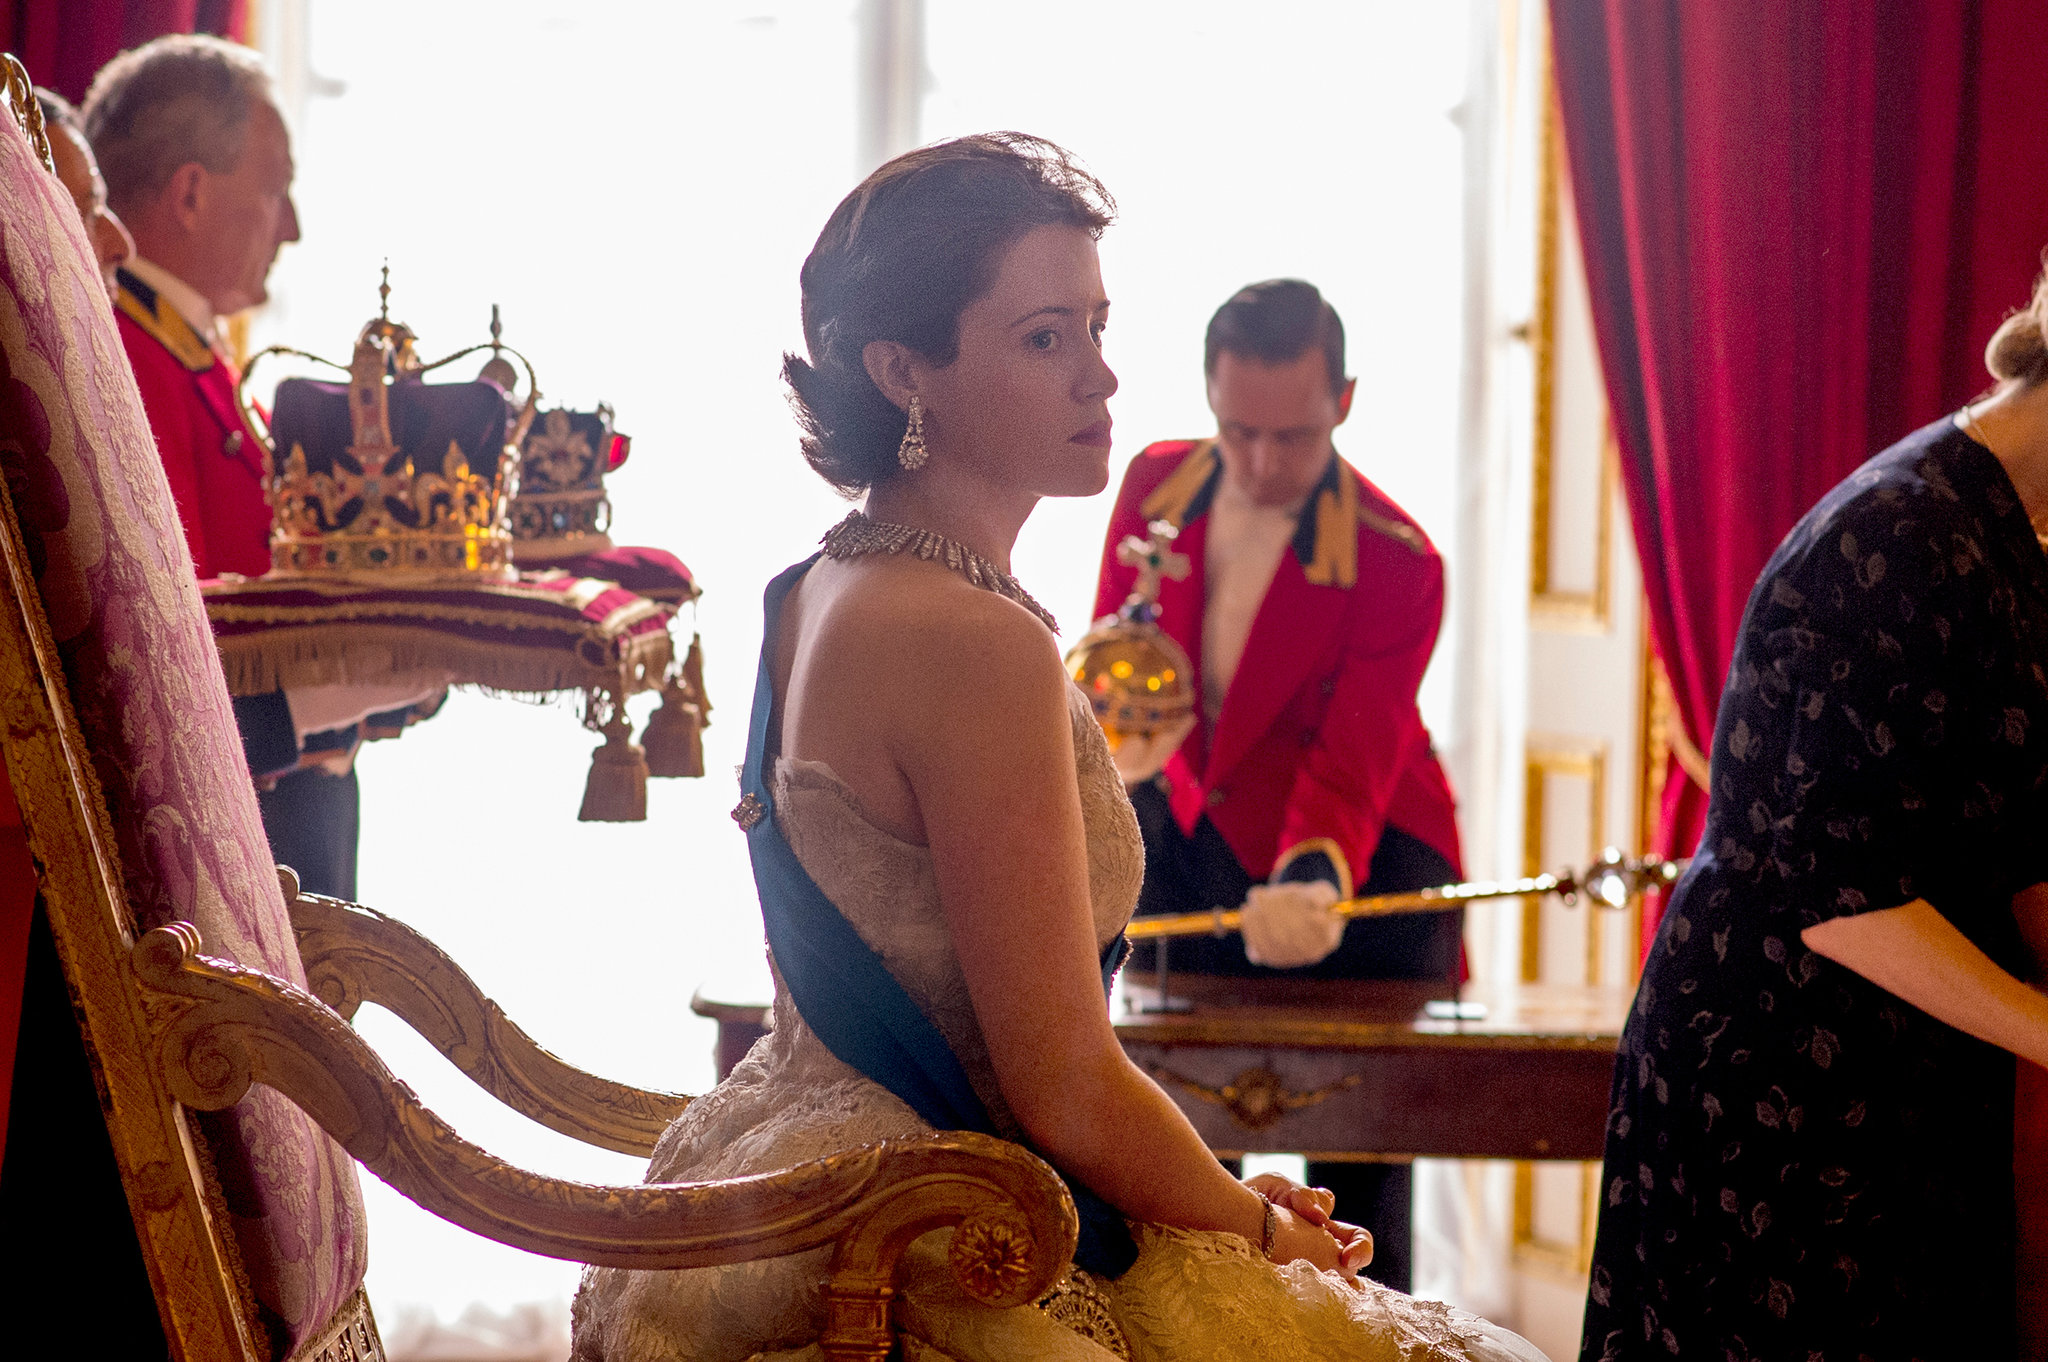 Claire Foy The Crown Actress Wallpapers